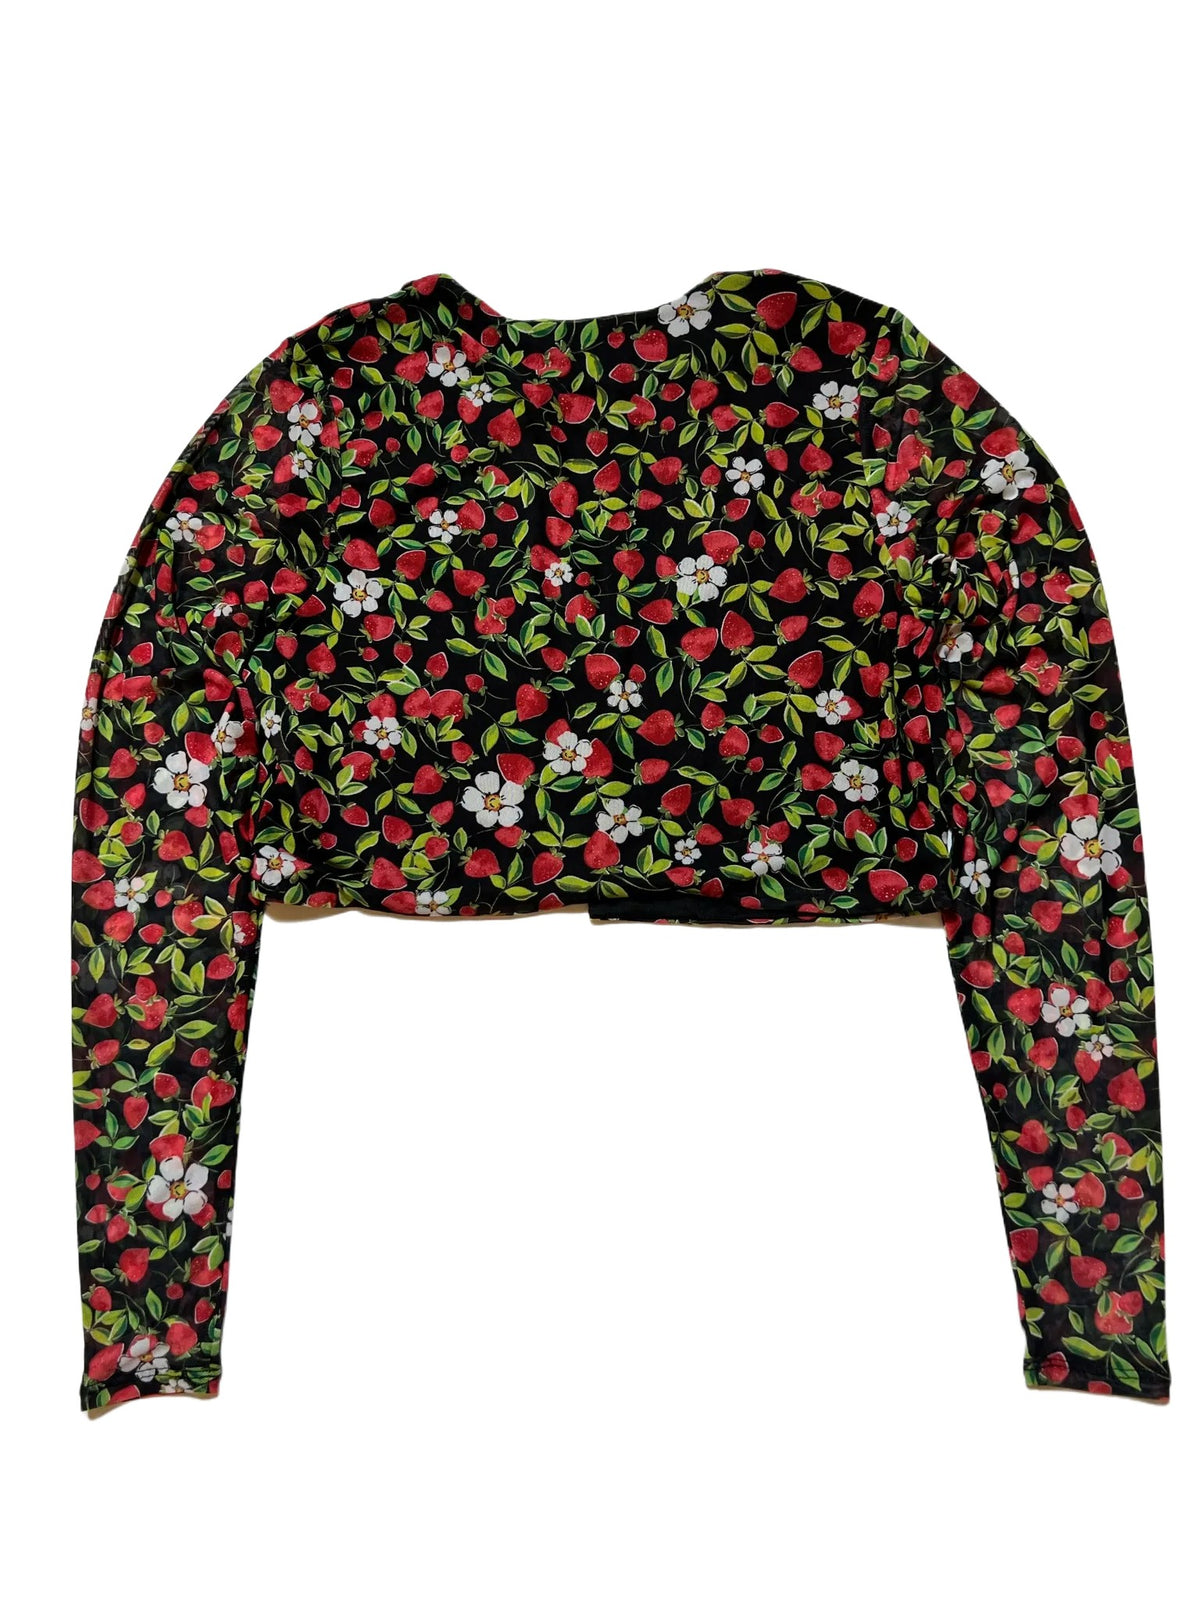 AFRM- Strawberry Print Mesh Long Sleeve Tie Front Top